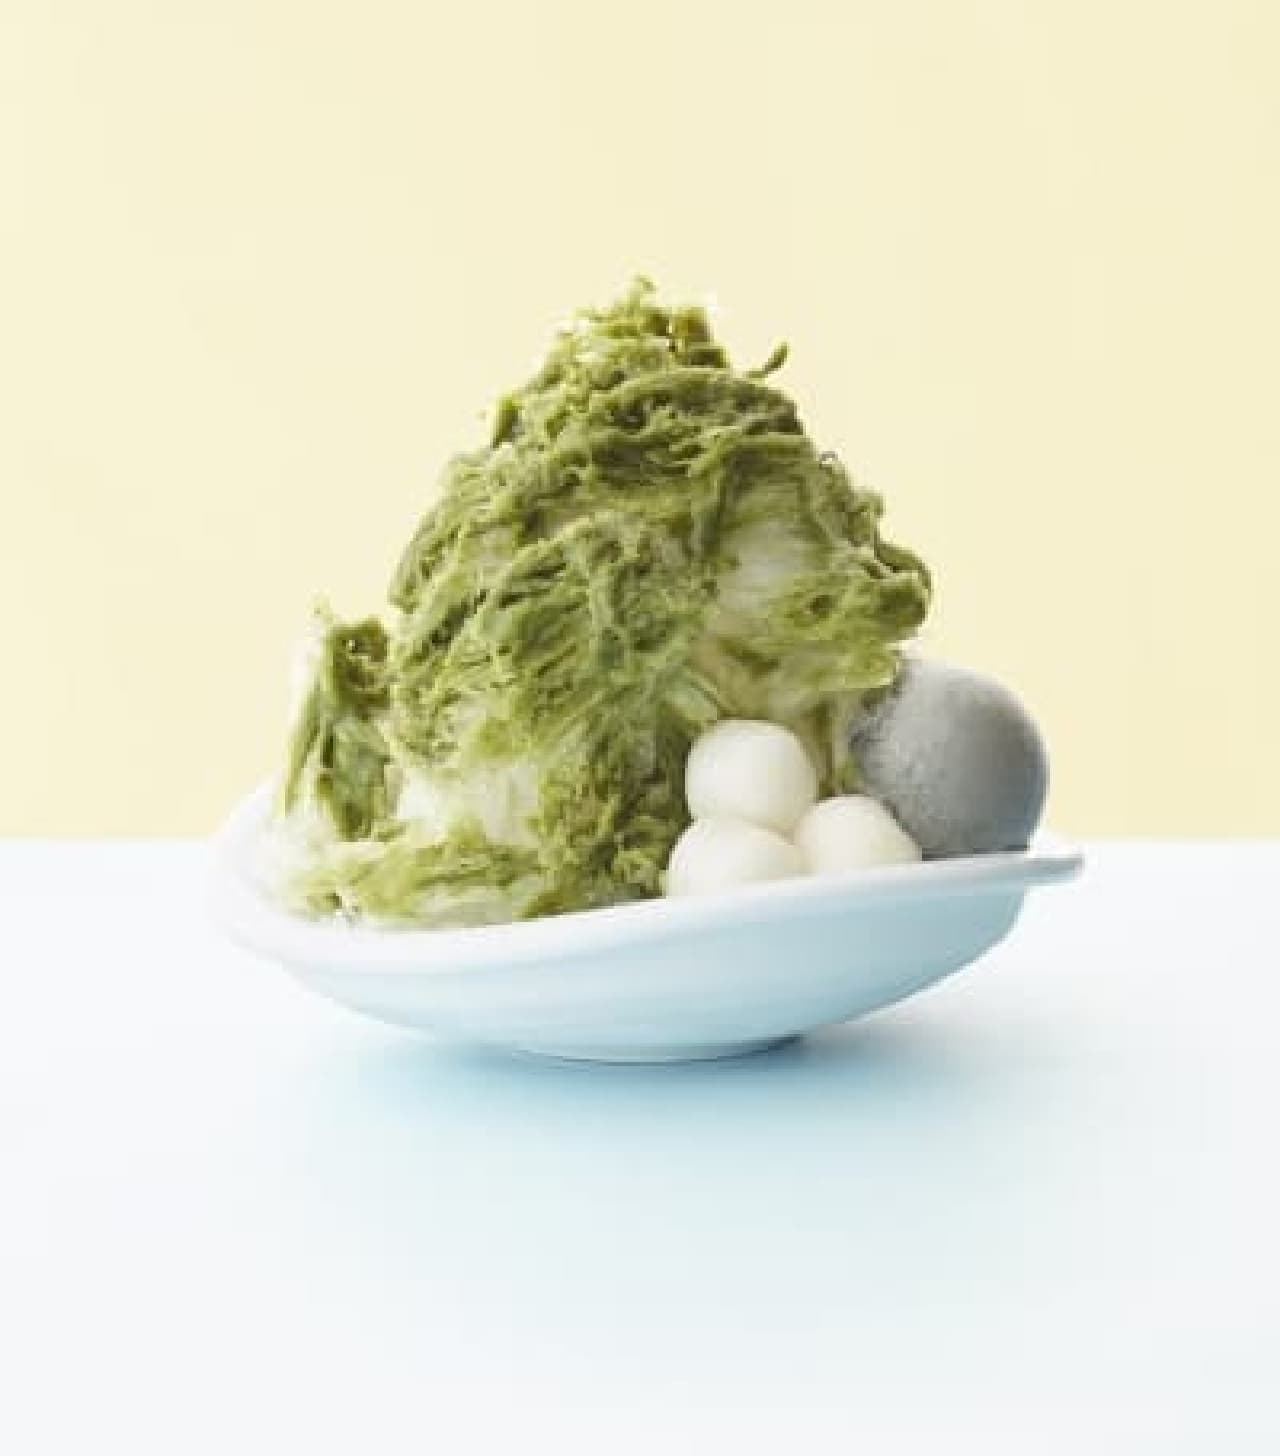 Coco's "Fluffy Shaved Ice of Uji Matcha"